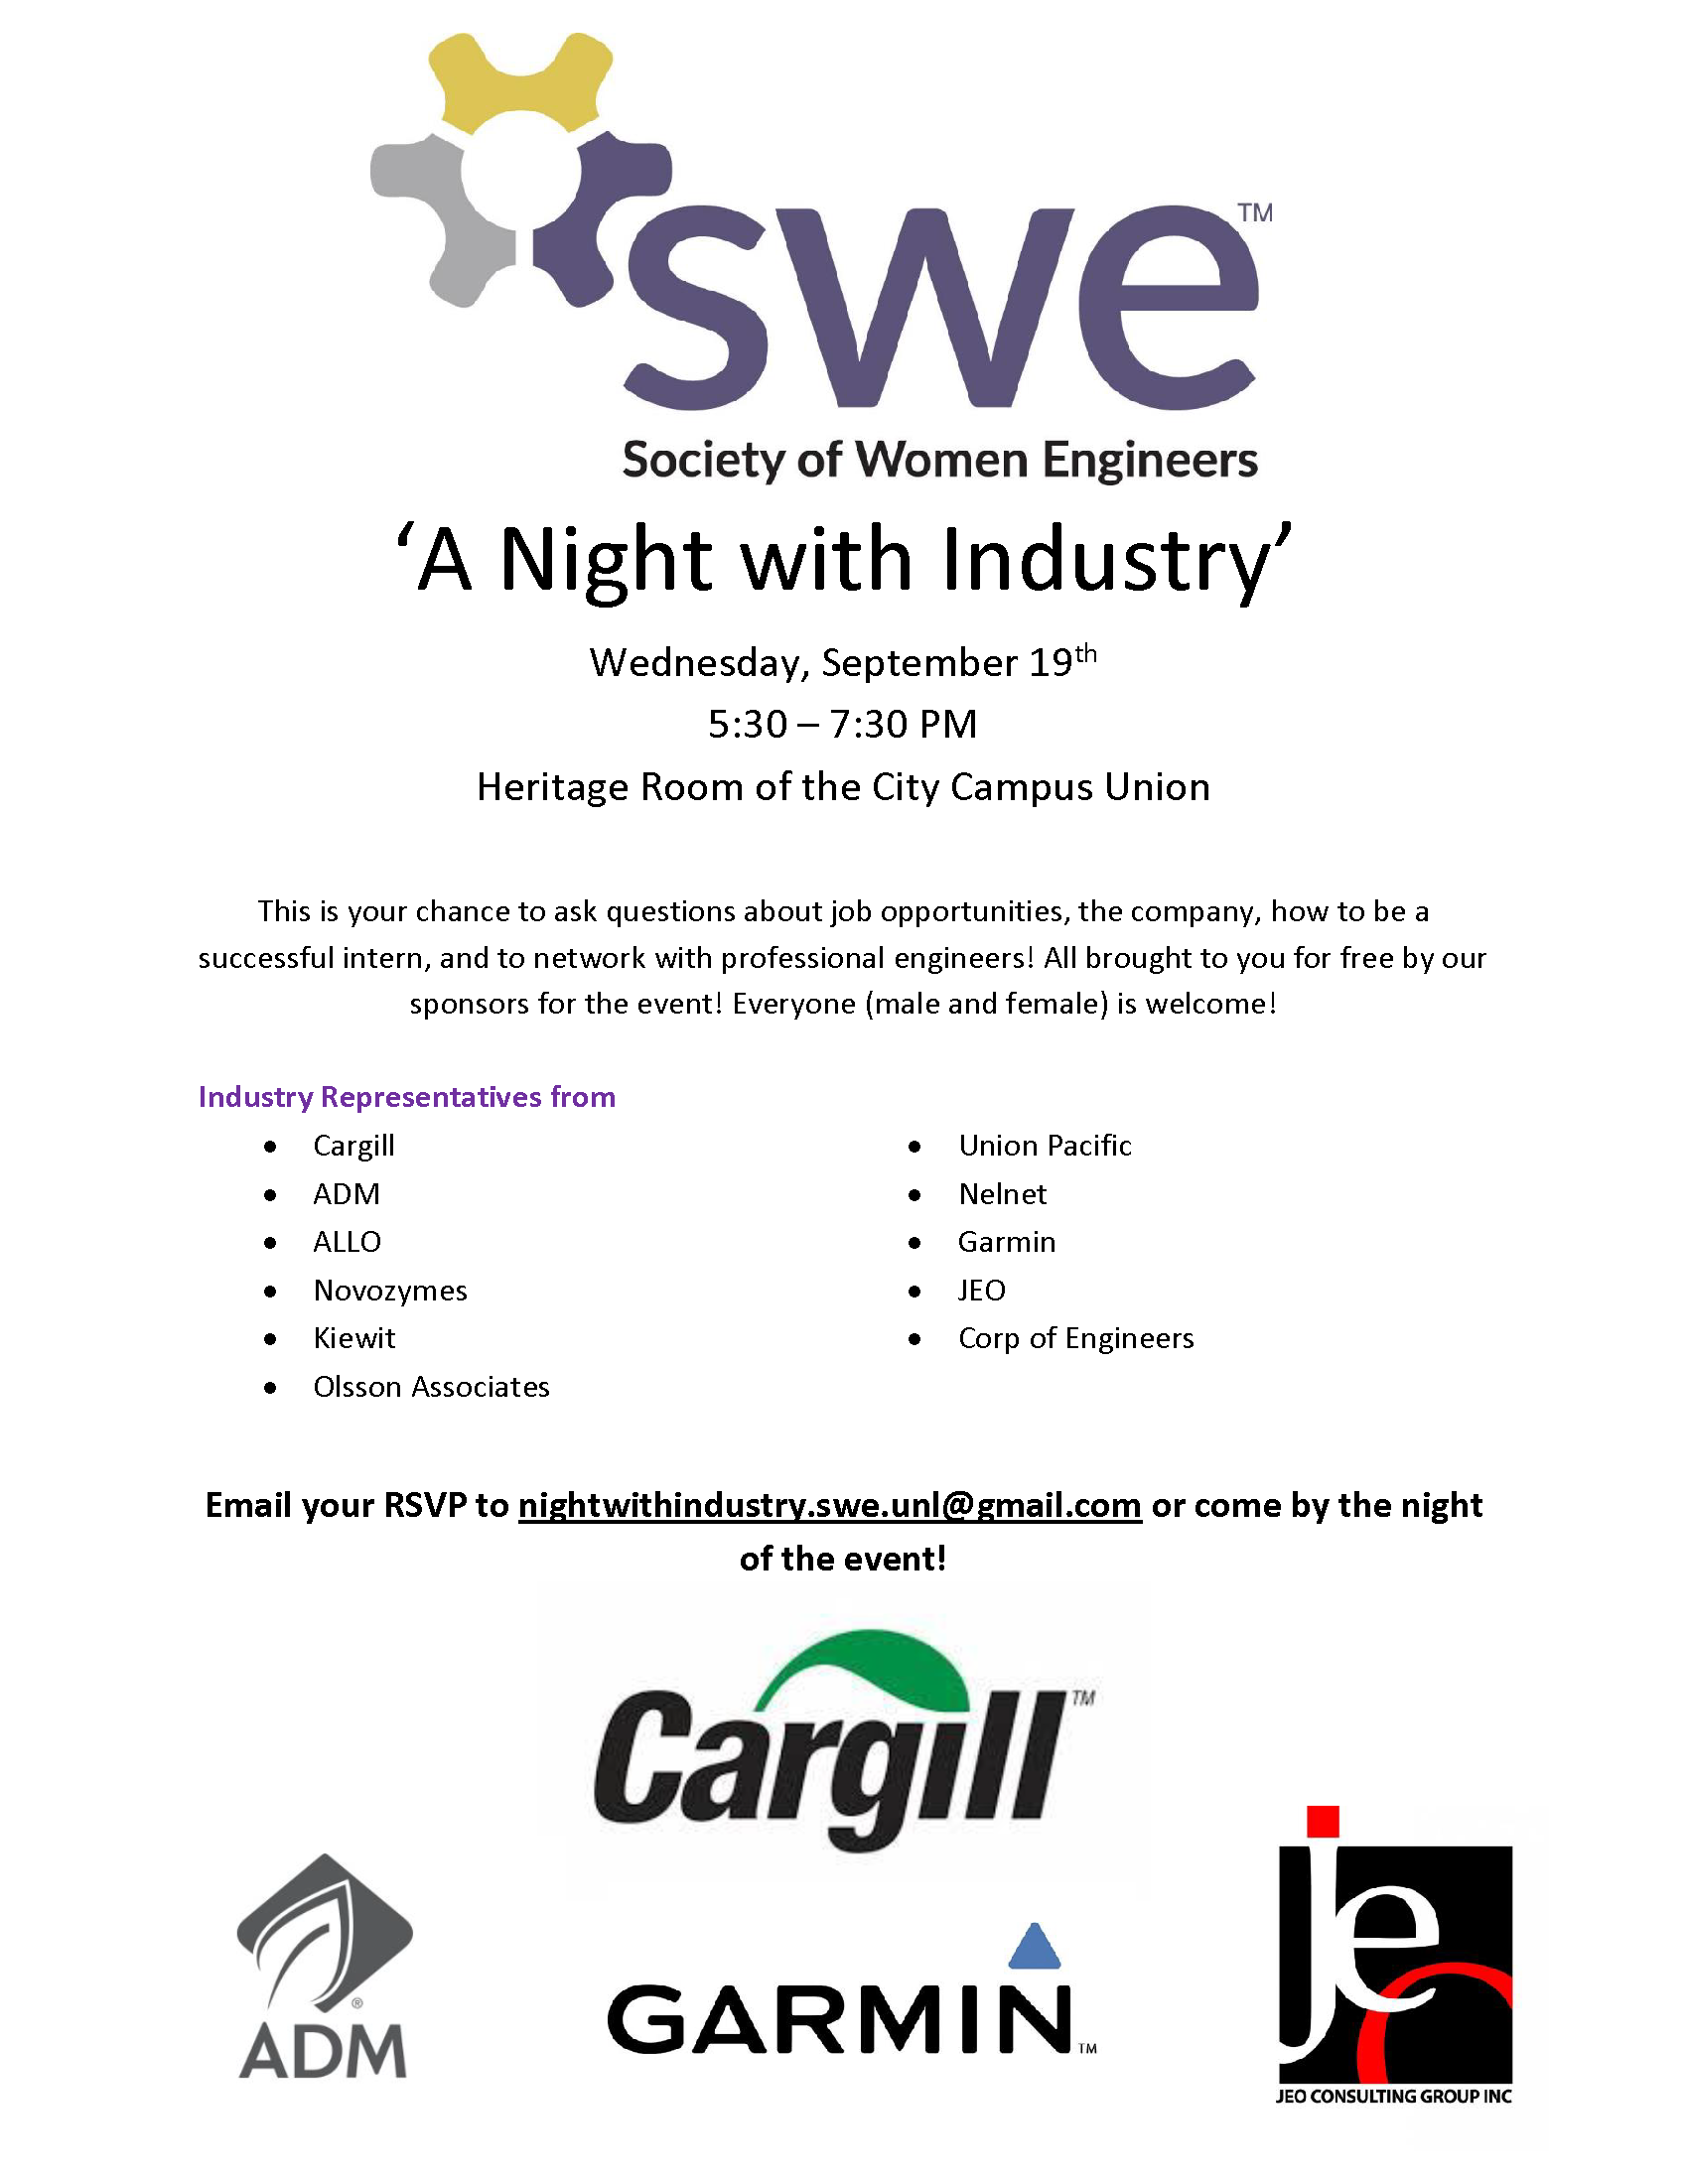 SWE Night with Industry details